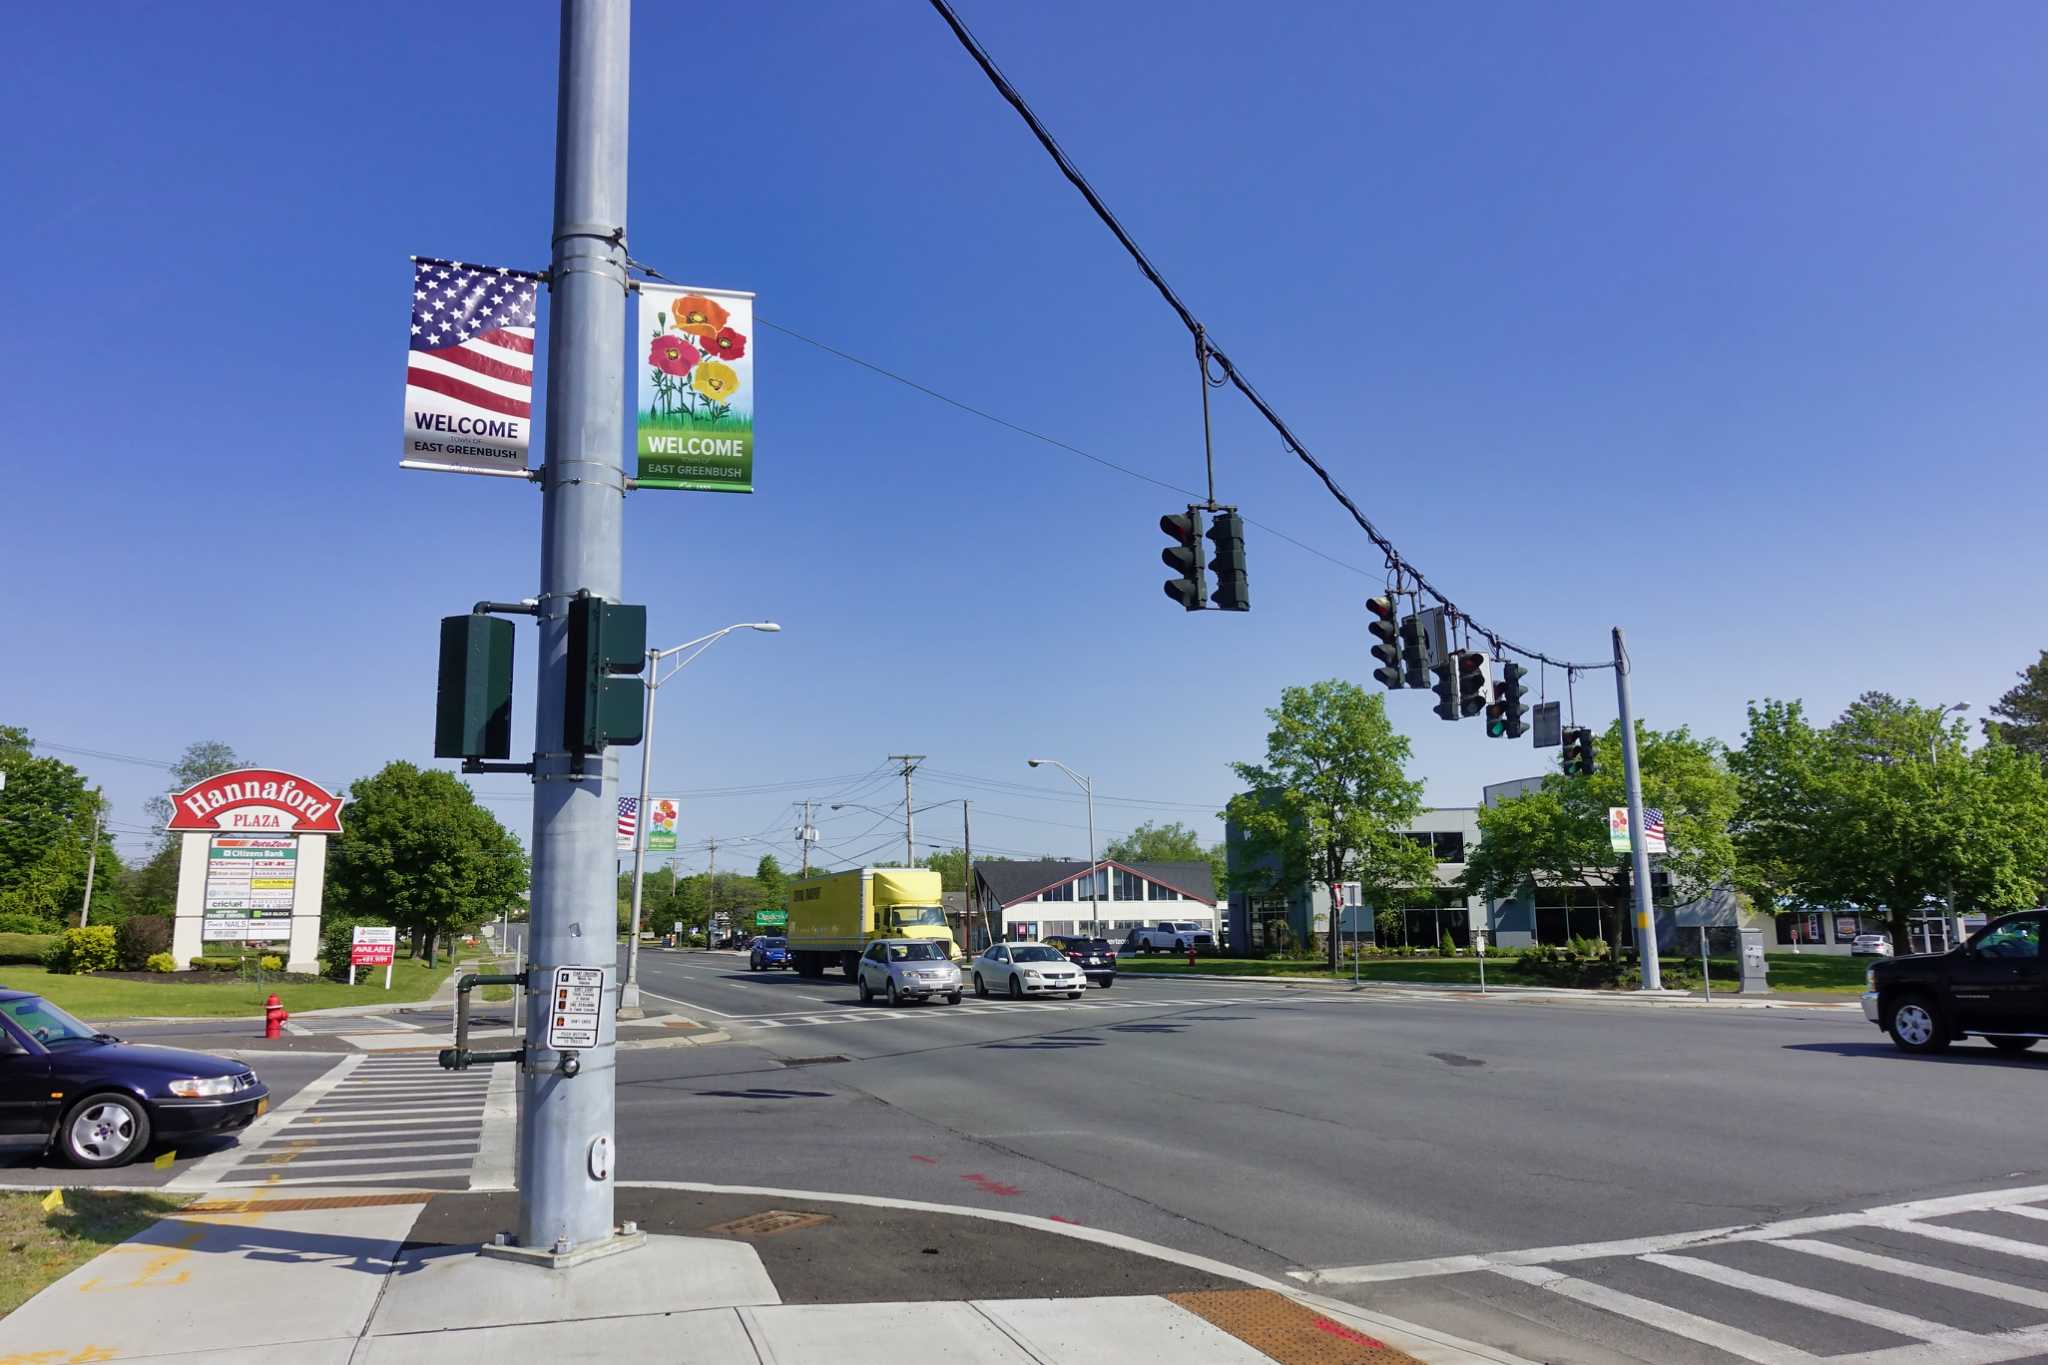 East Greenbush plans for a town center connected to hamlets